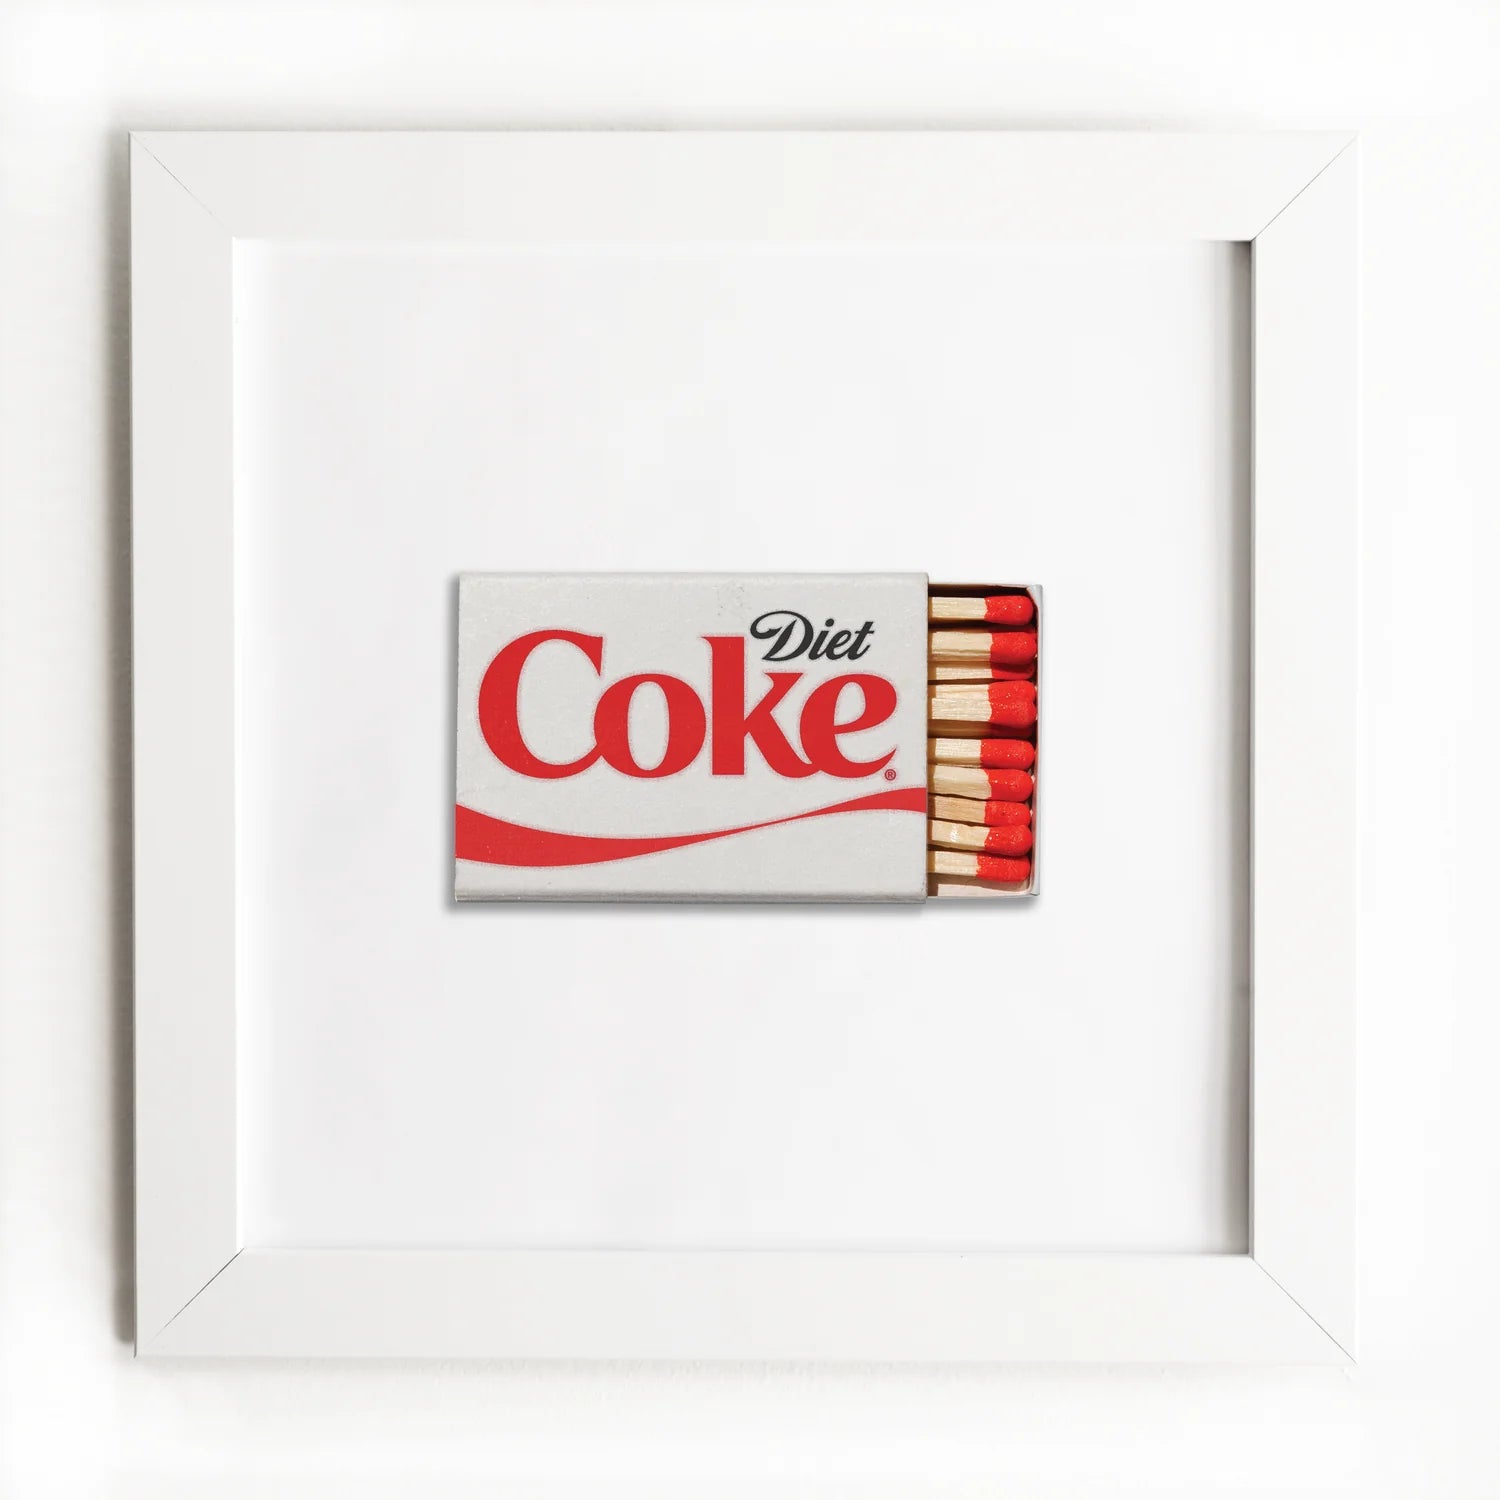 A framed artwork showcasing a miniature Diet Coke can label partially wrapped over a small matchbox with red-tipped matches, all against a pure white background in Match South style using the Art Square White Frame.